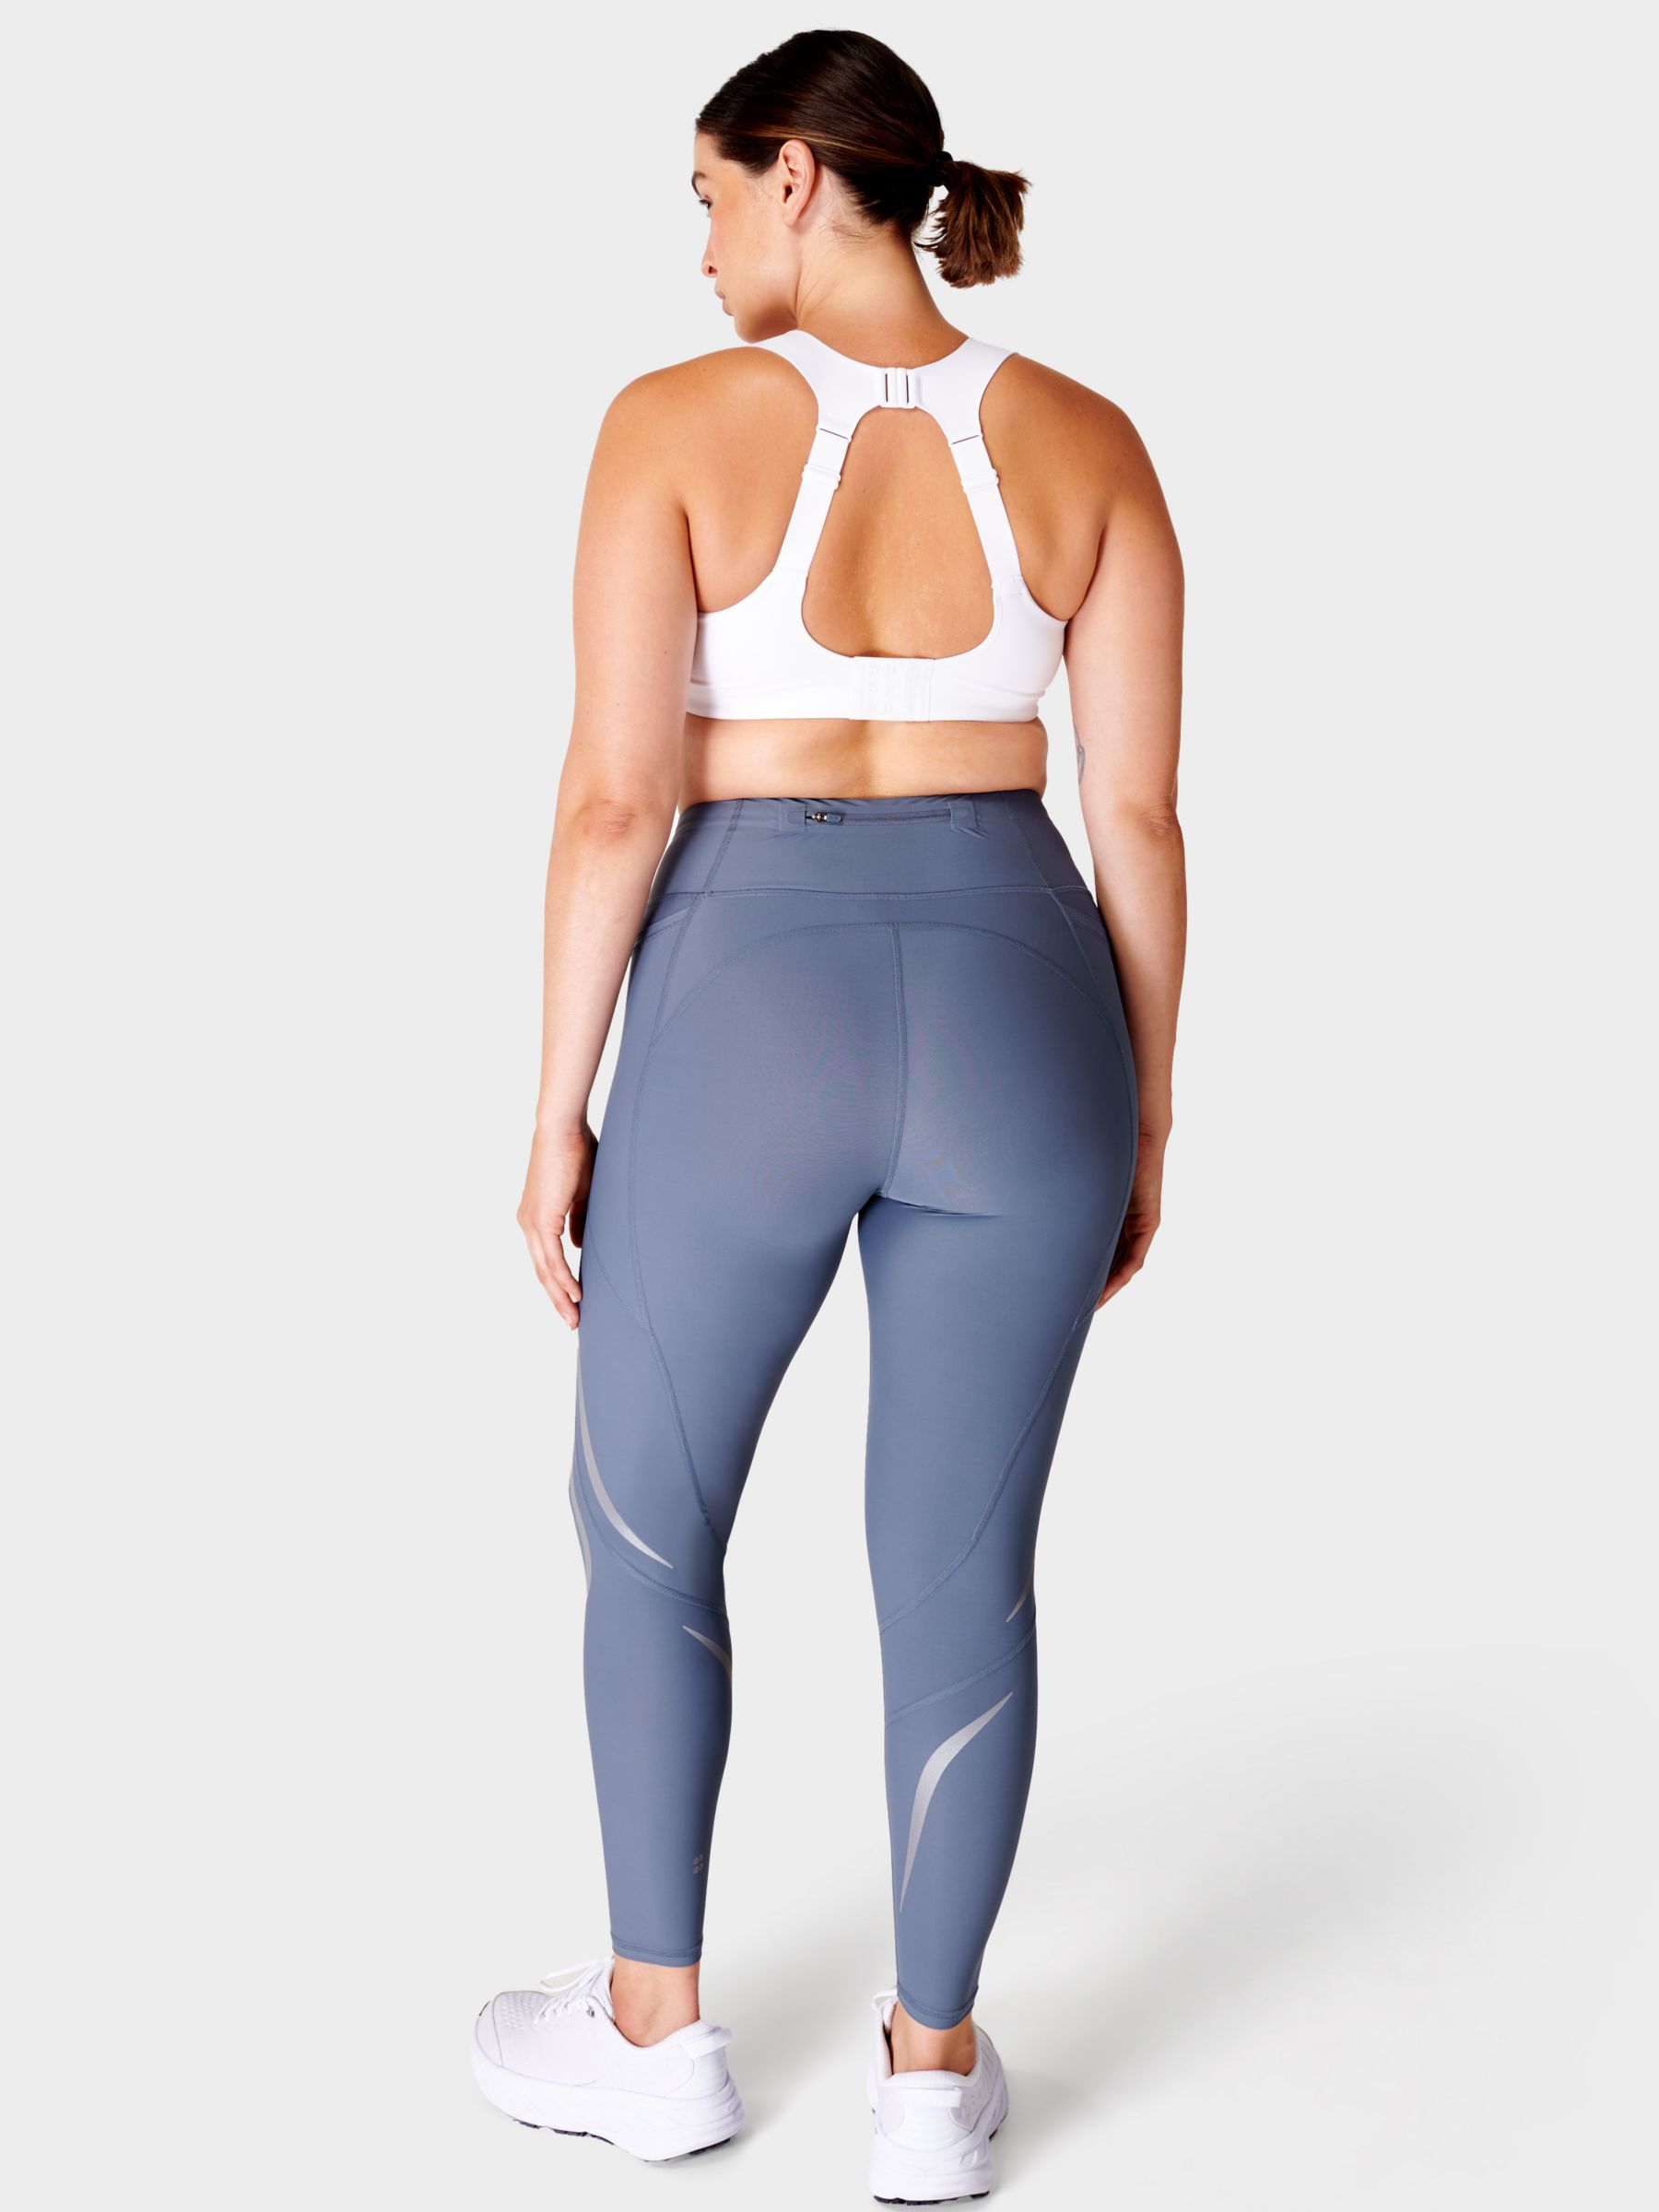 Therma Boost 2.0 7/8 Reflective Running Leggings - Endless Blue